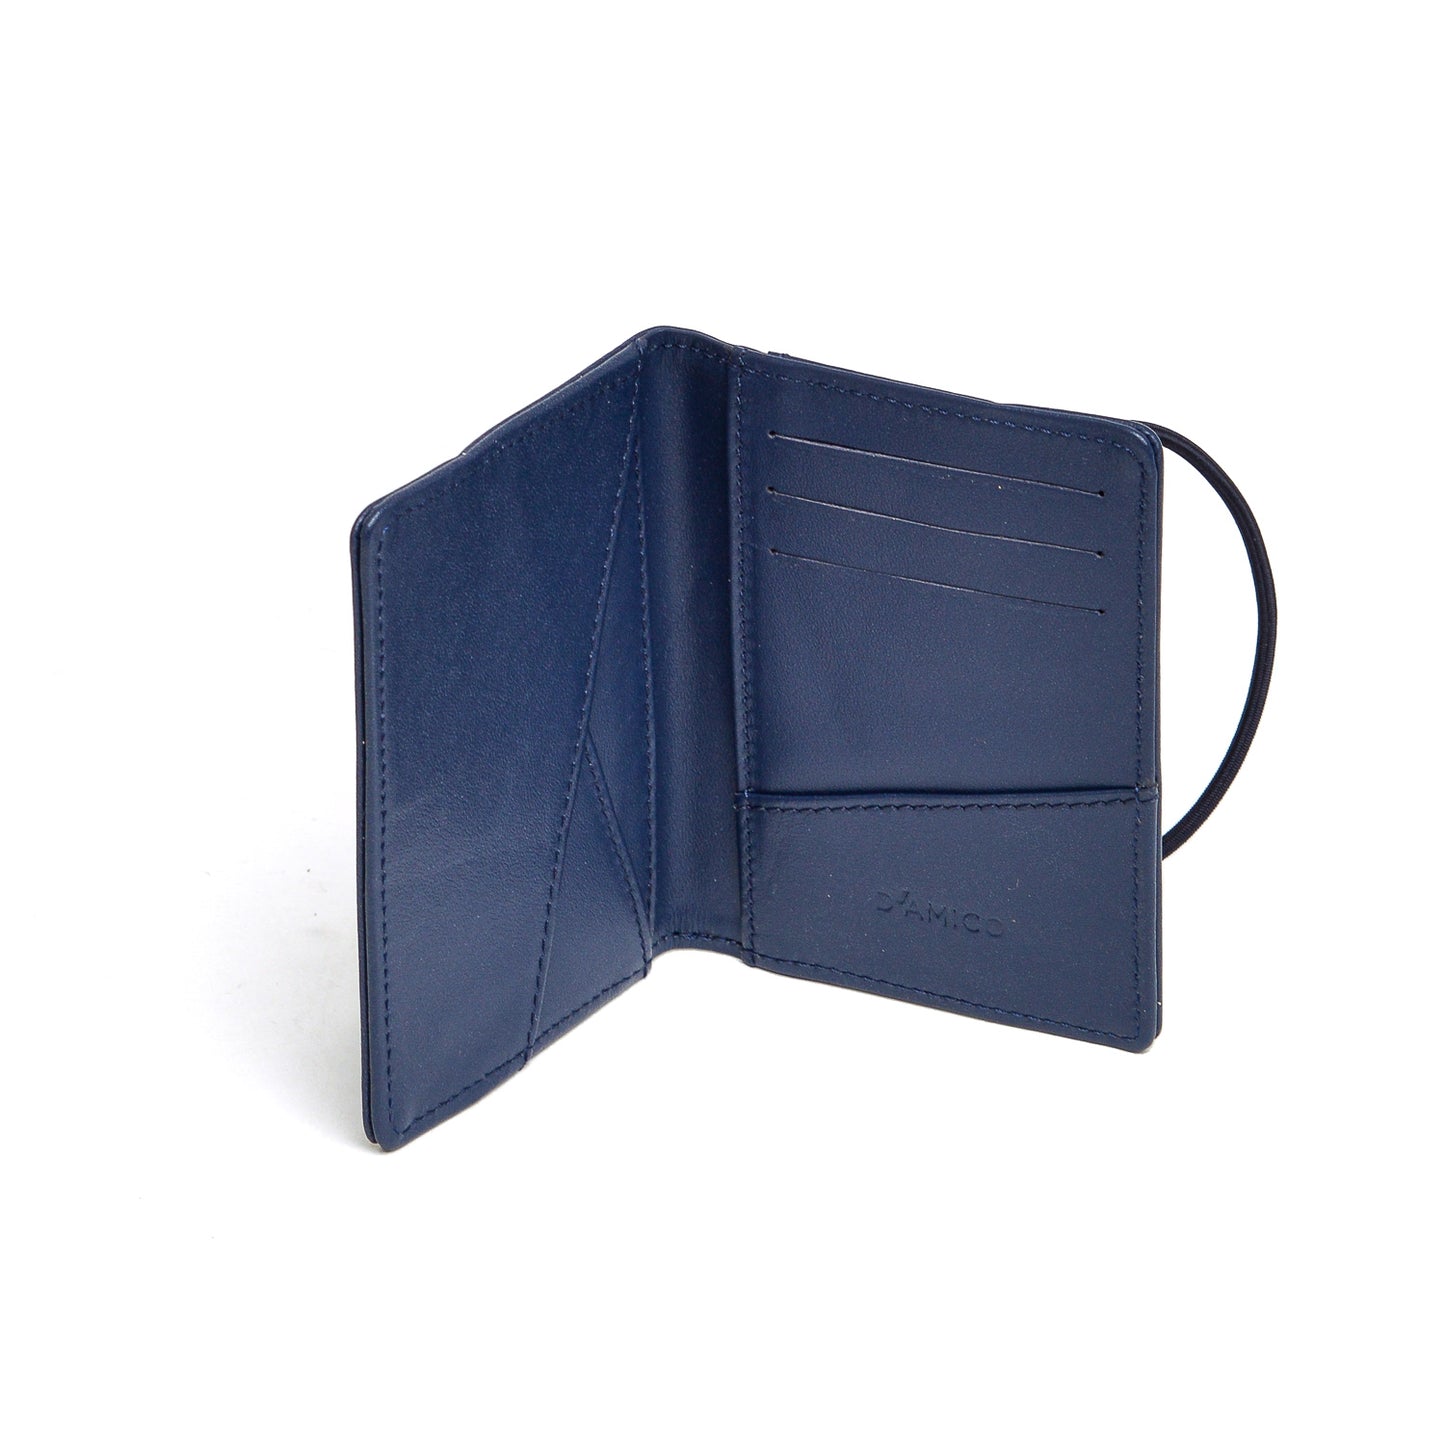 Classic Blue Leather Folding Wallet